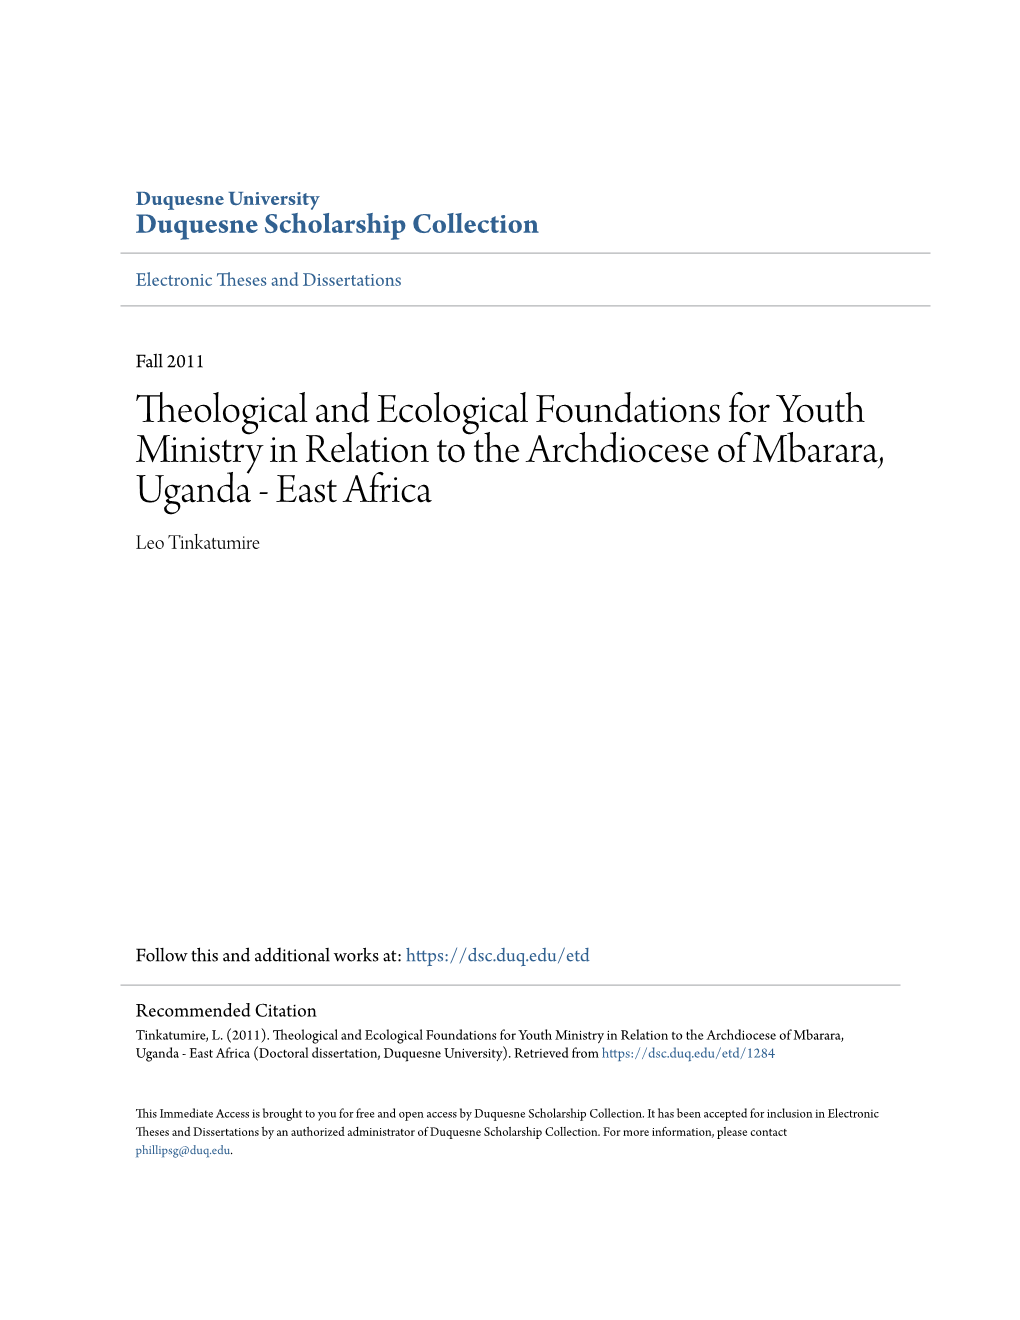 Theological and Ecological Foundations for Youth Ministry in Relation to the Archdiocese of Mbarara, Uganda - East Africa Leo Tinkatumire